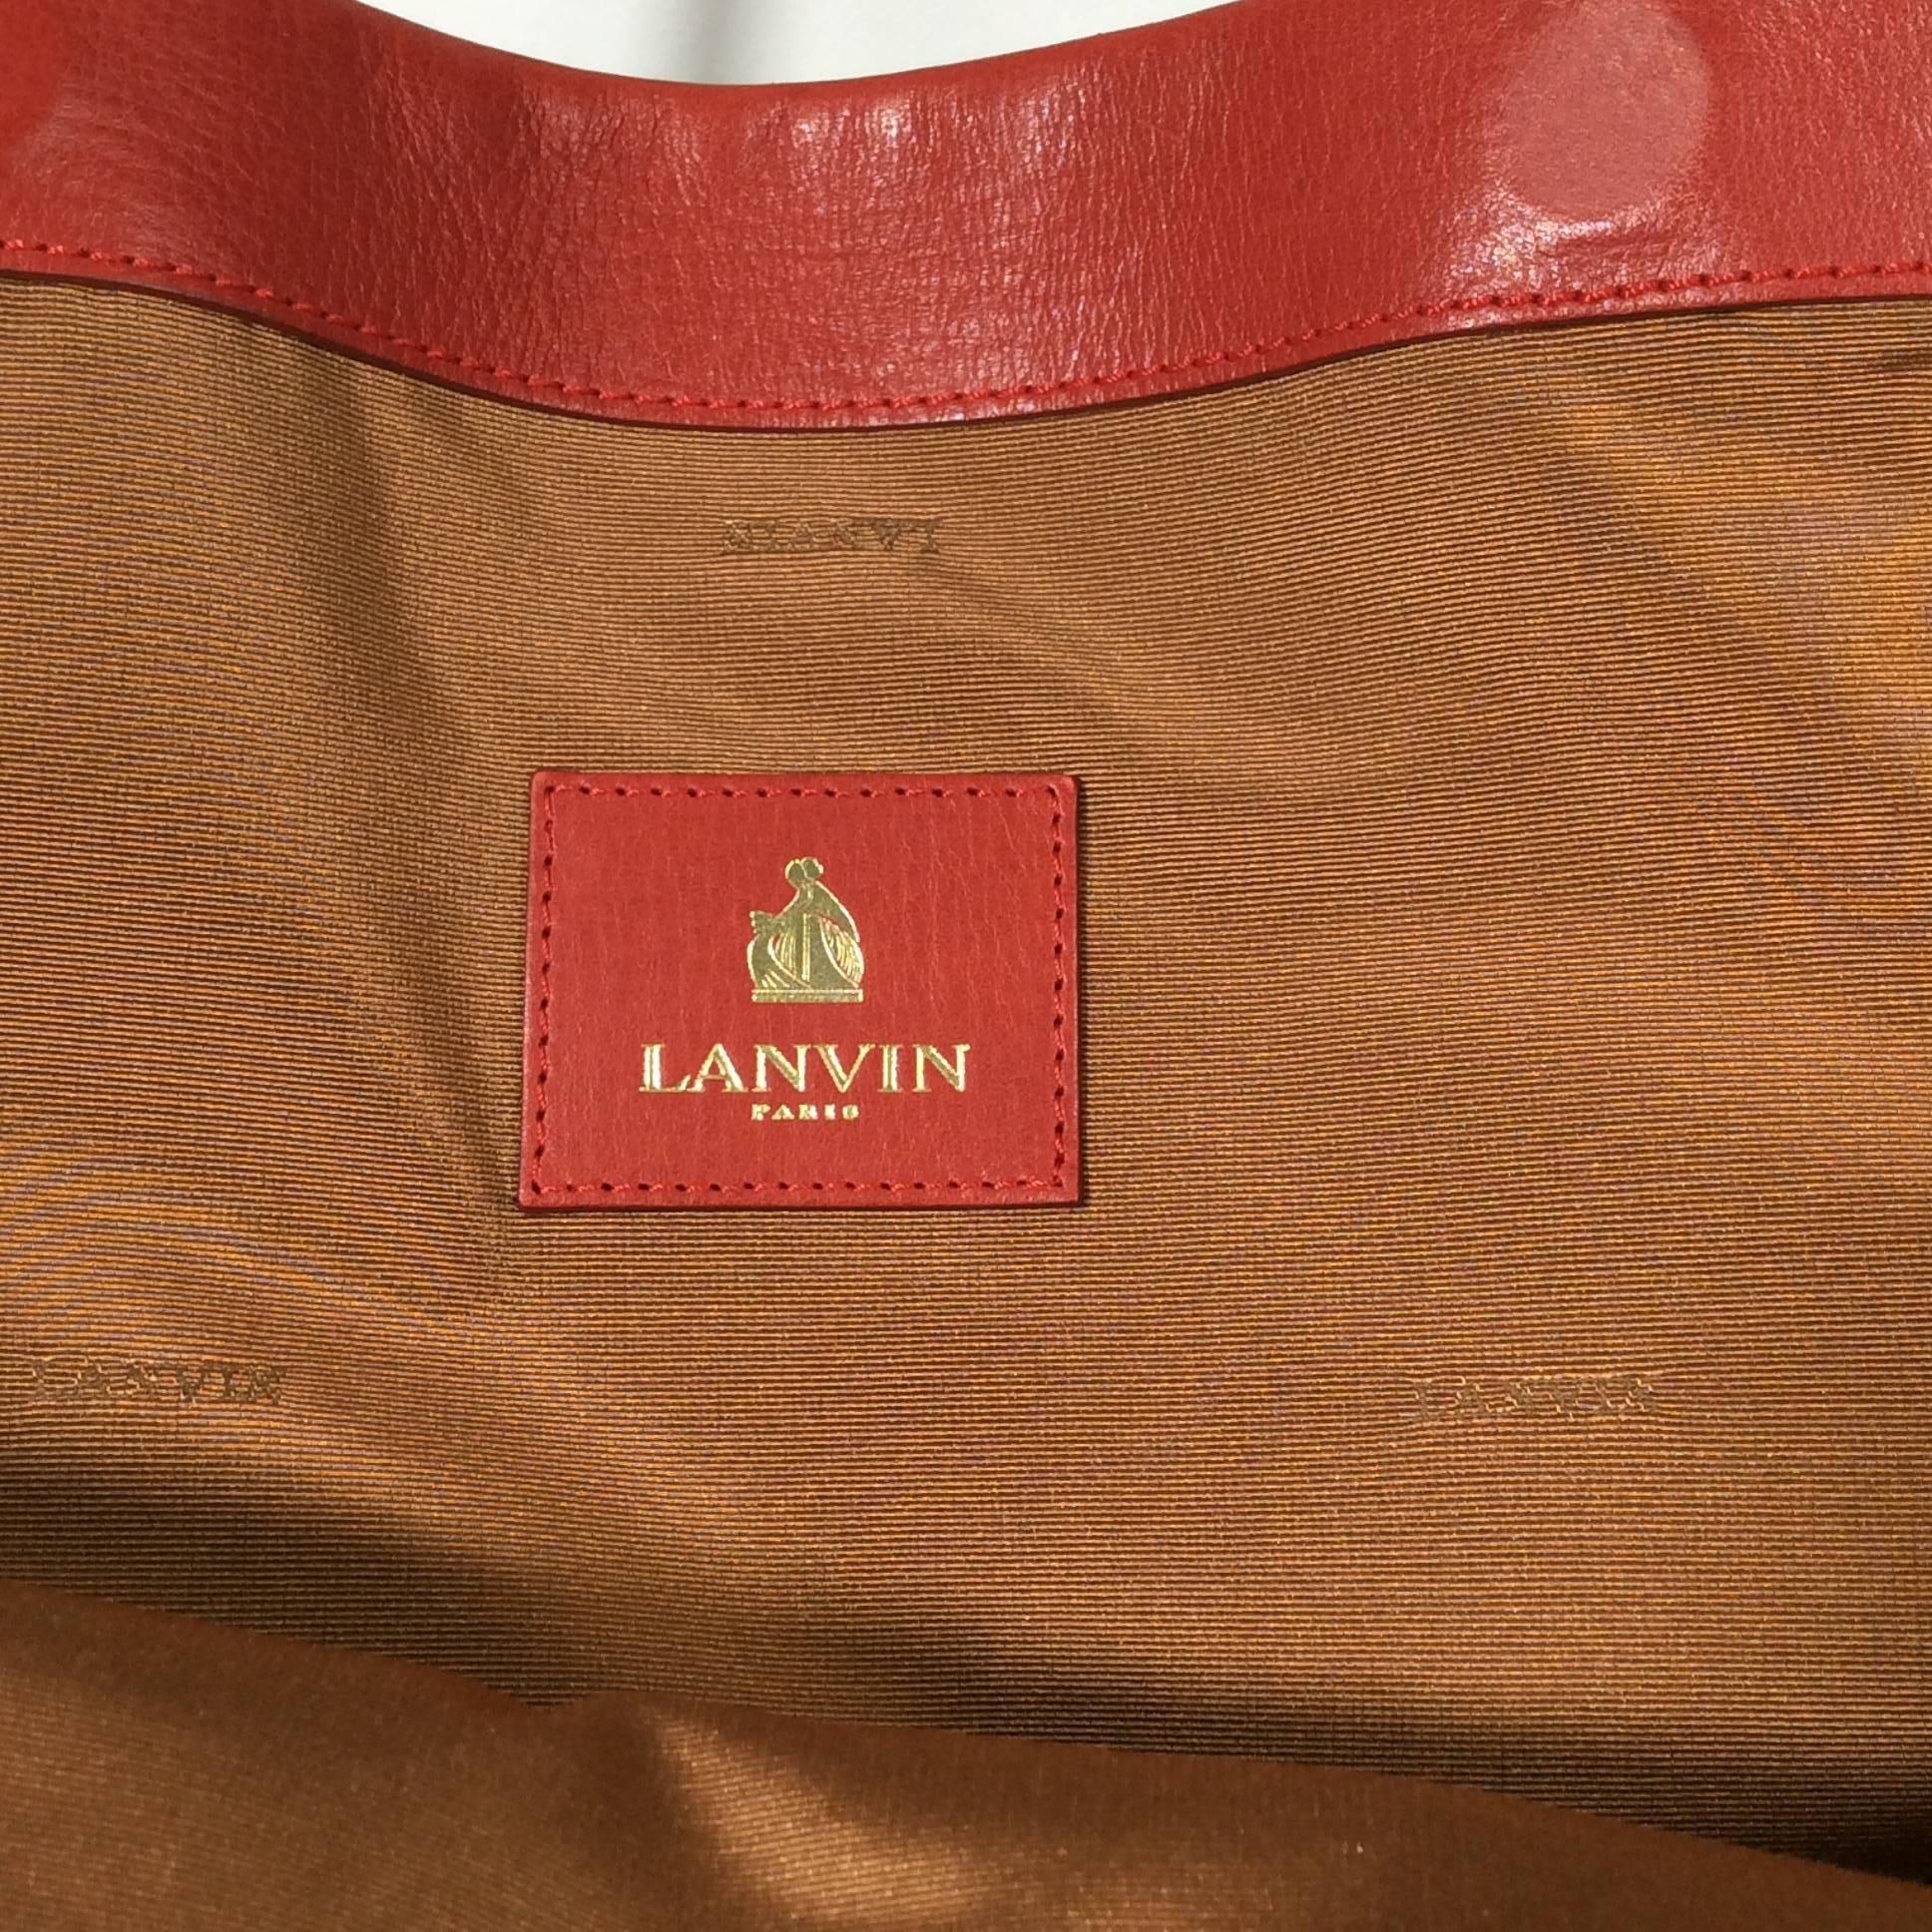 Lanvin Red Leather Tote with Gold Hardware
Two external compartments
No internal pockets
6.5 inch strap drop
Leather exterior with woven taupe lining
Includes standing hardware on base of bag